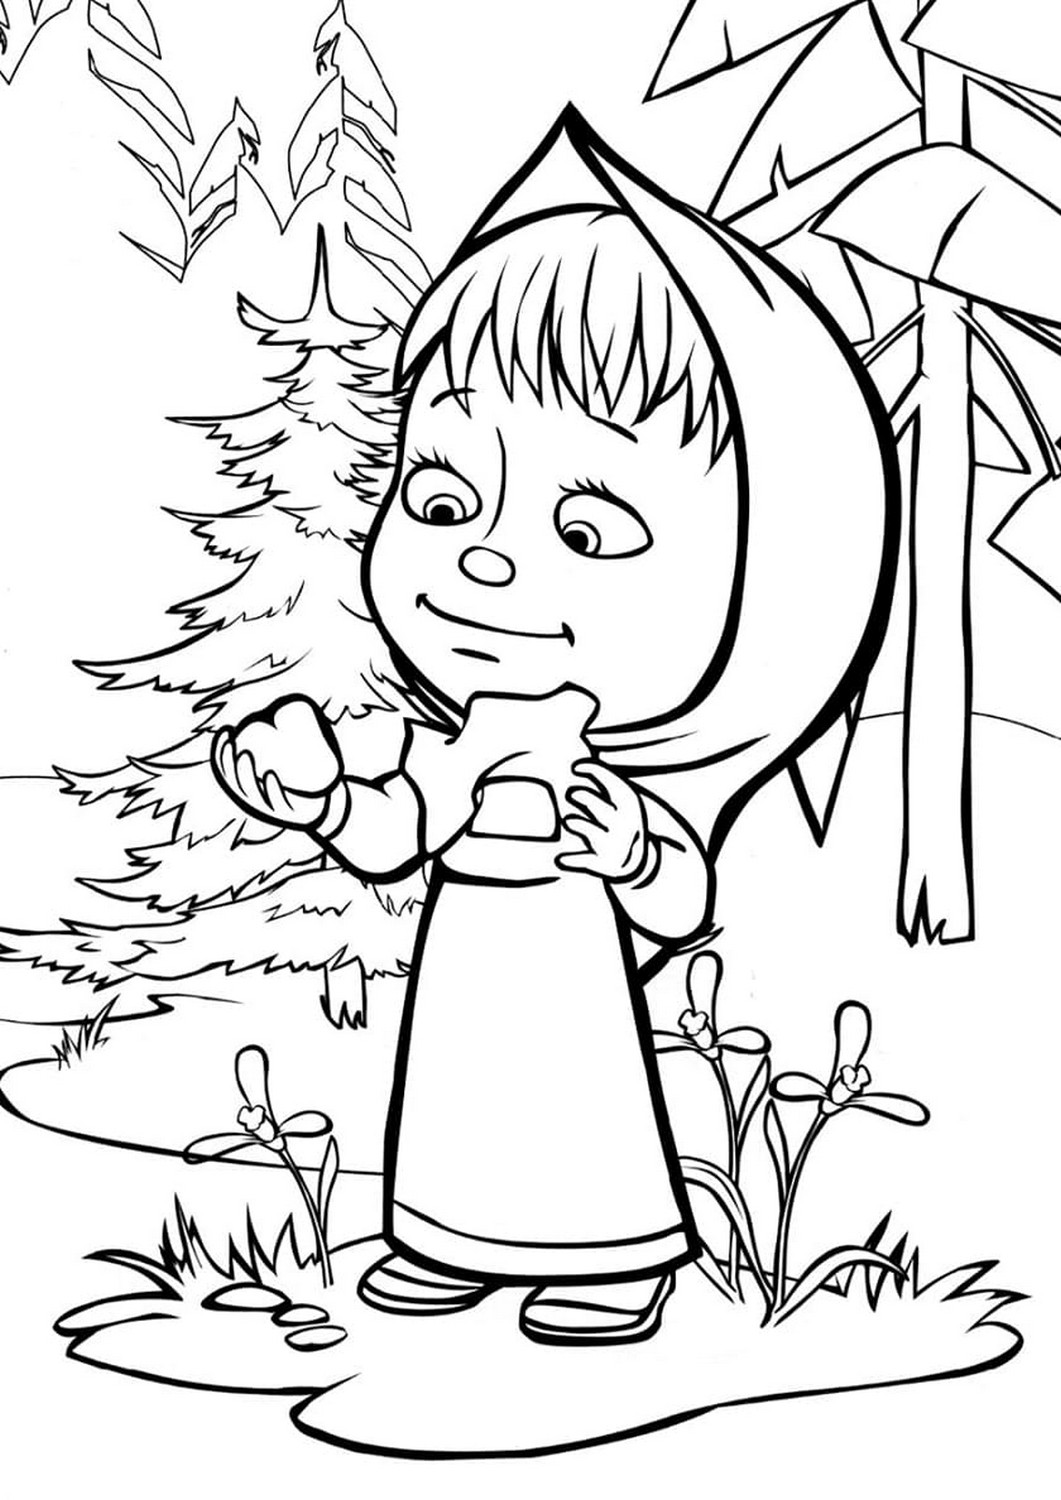 Drawing 37 of Masha and the Bear to print and color